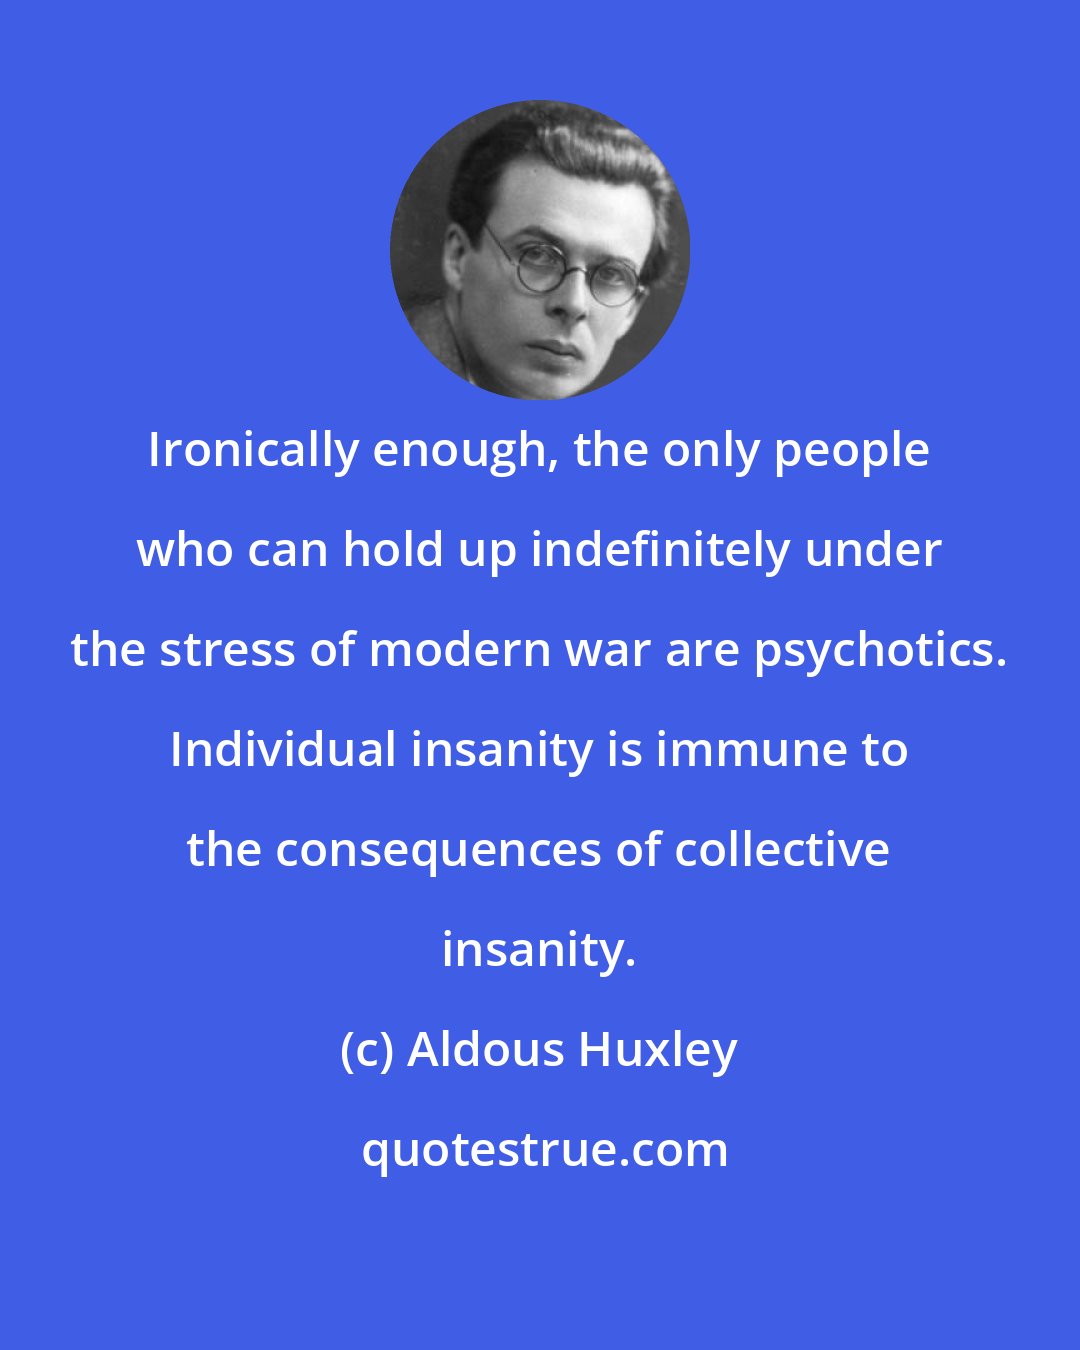 Aldous Huxley: Ironically enough, the only people who can hold up indefinitely under the stress of modern war are psychotics. Individual insanity is immune to the consequences of collective insanity.